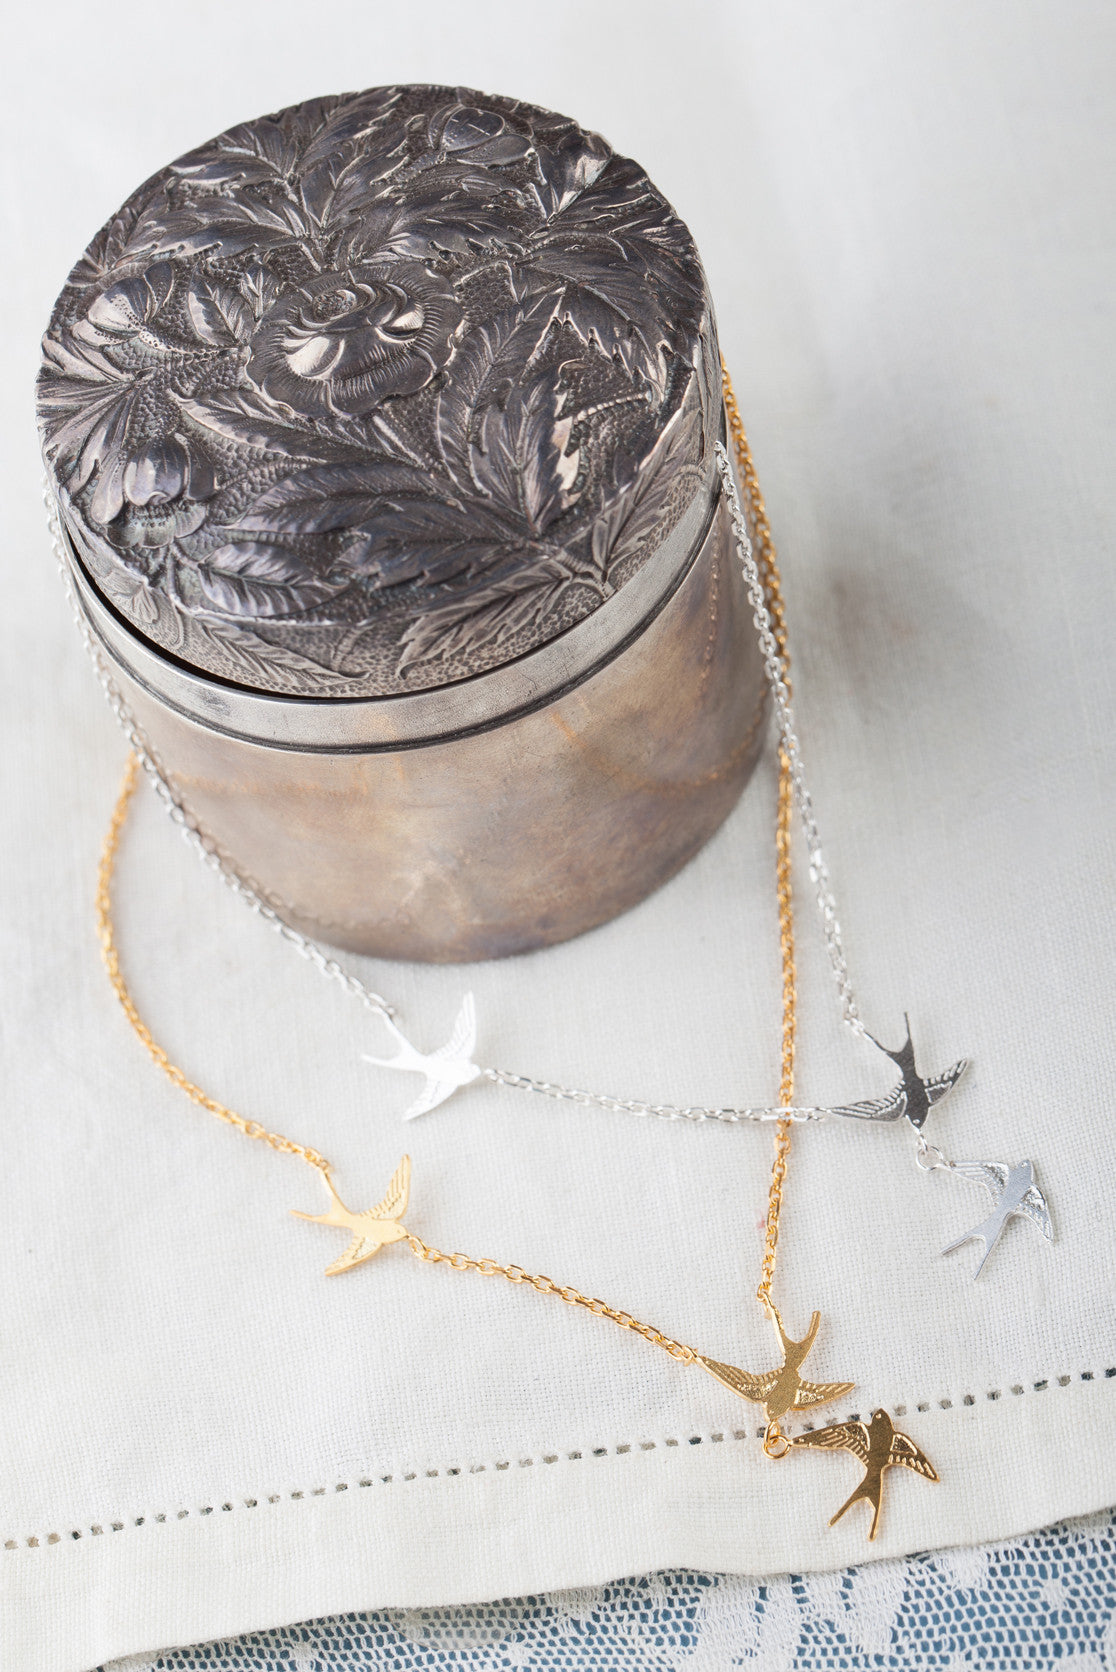 Three Swallows Necklace